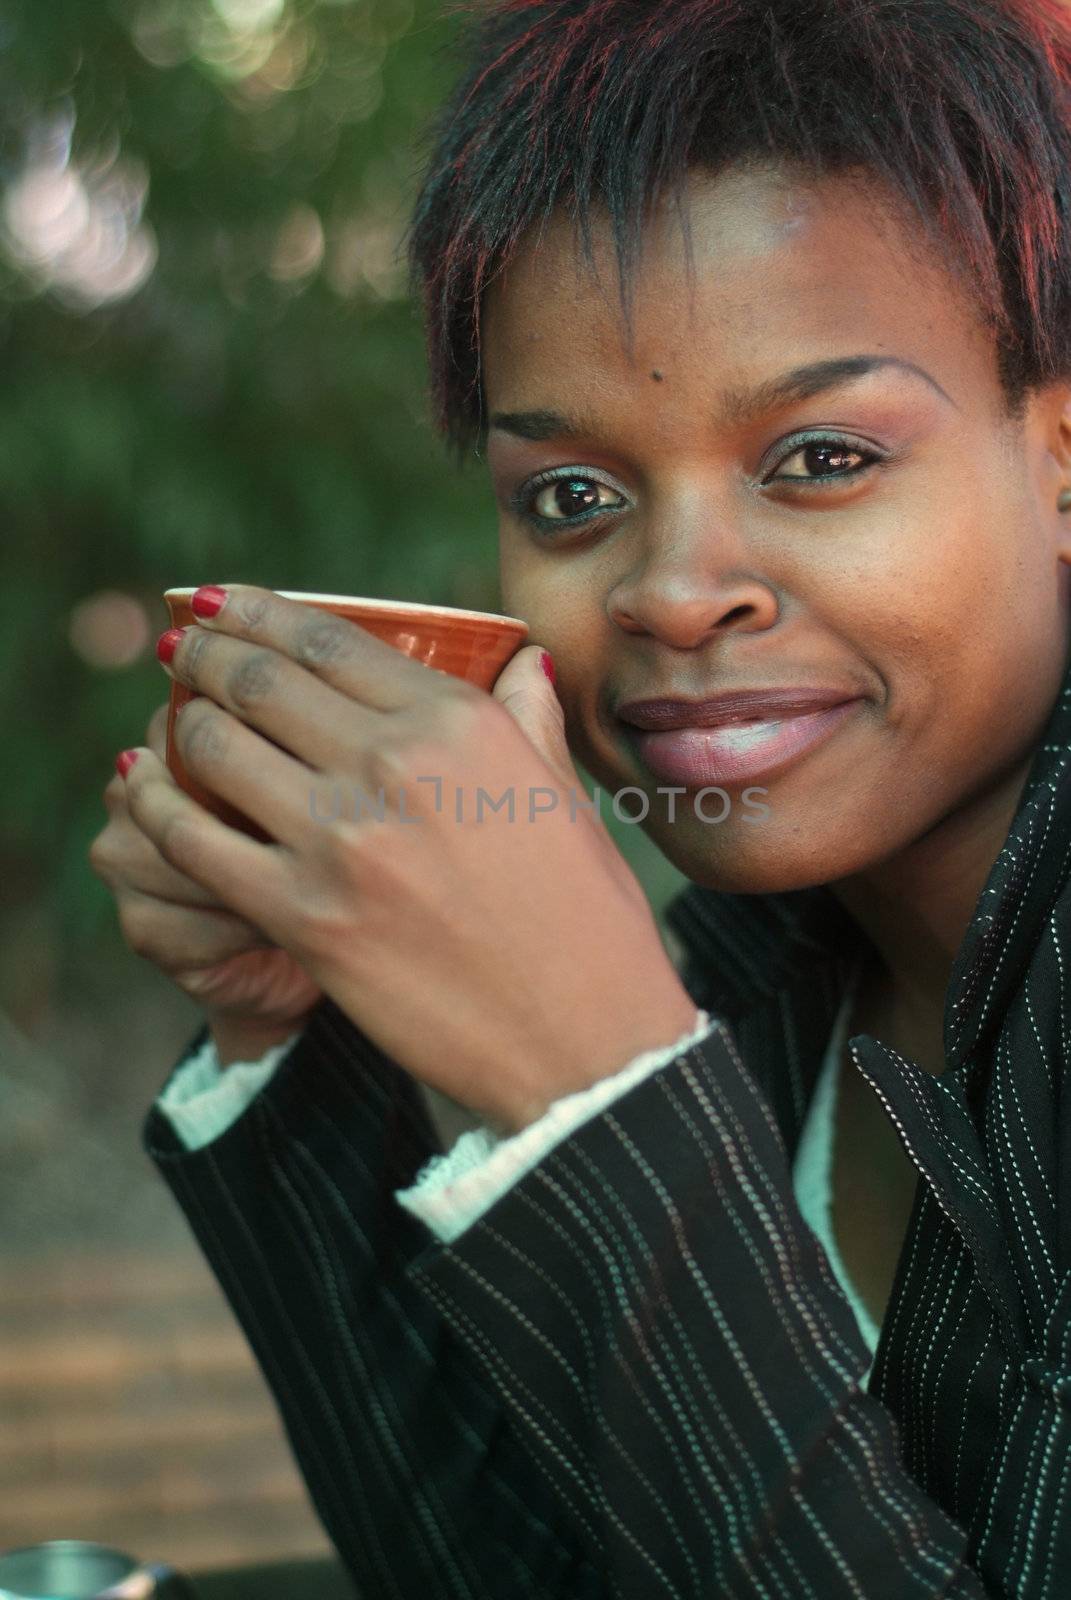 African American businesswoman portrait with coffee